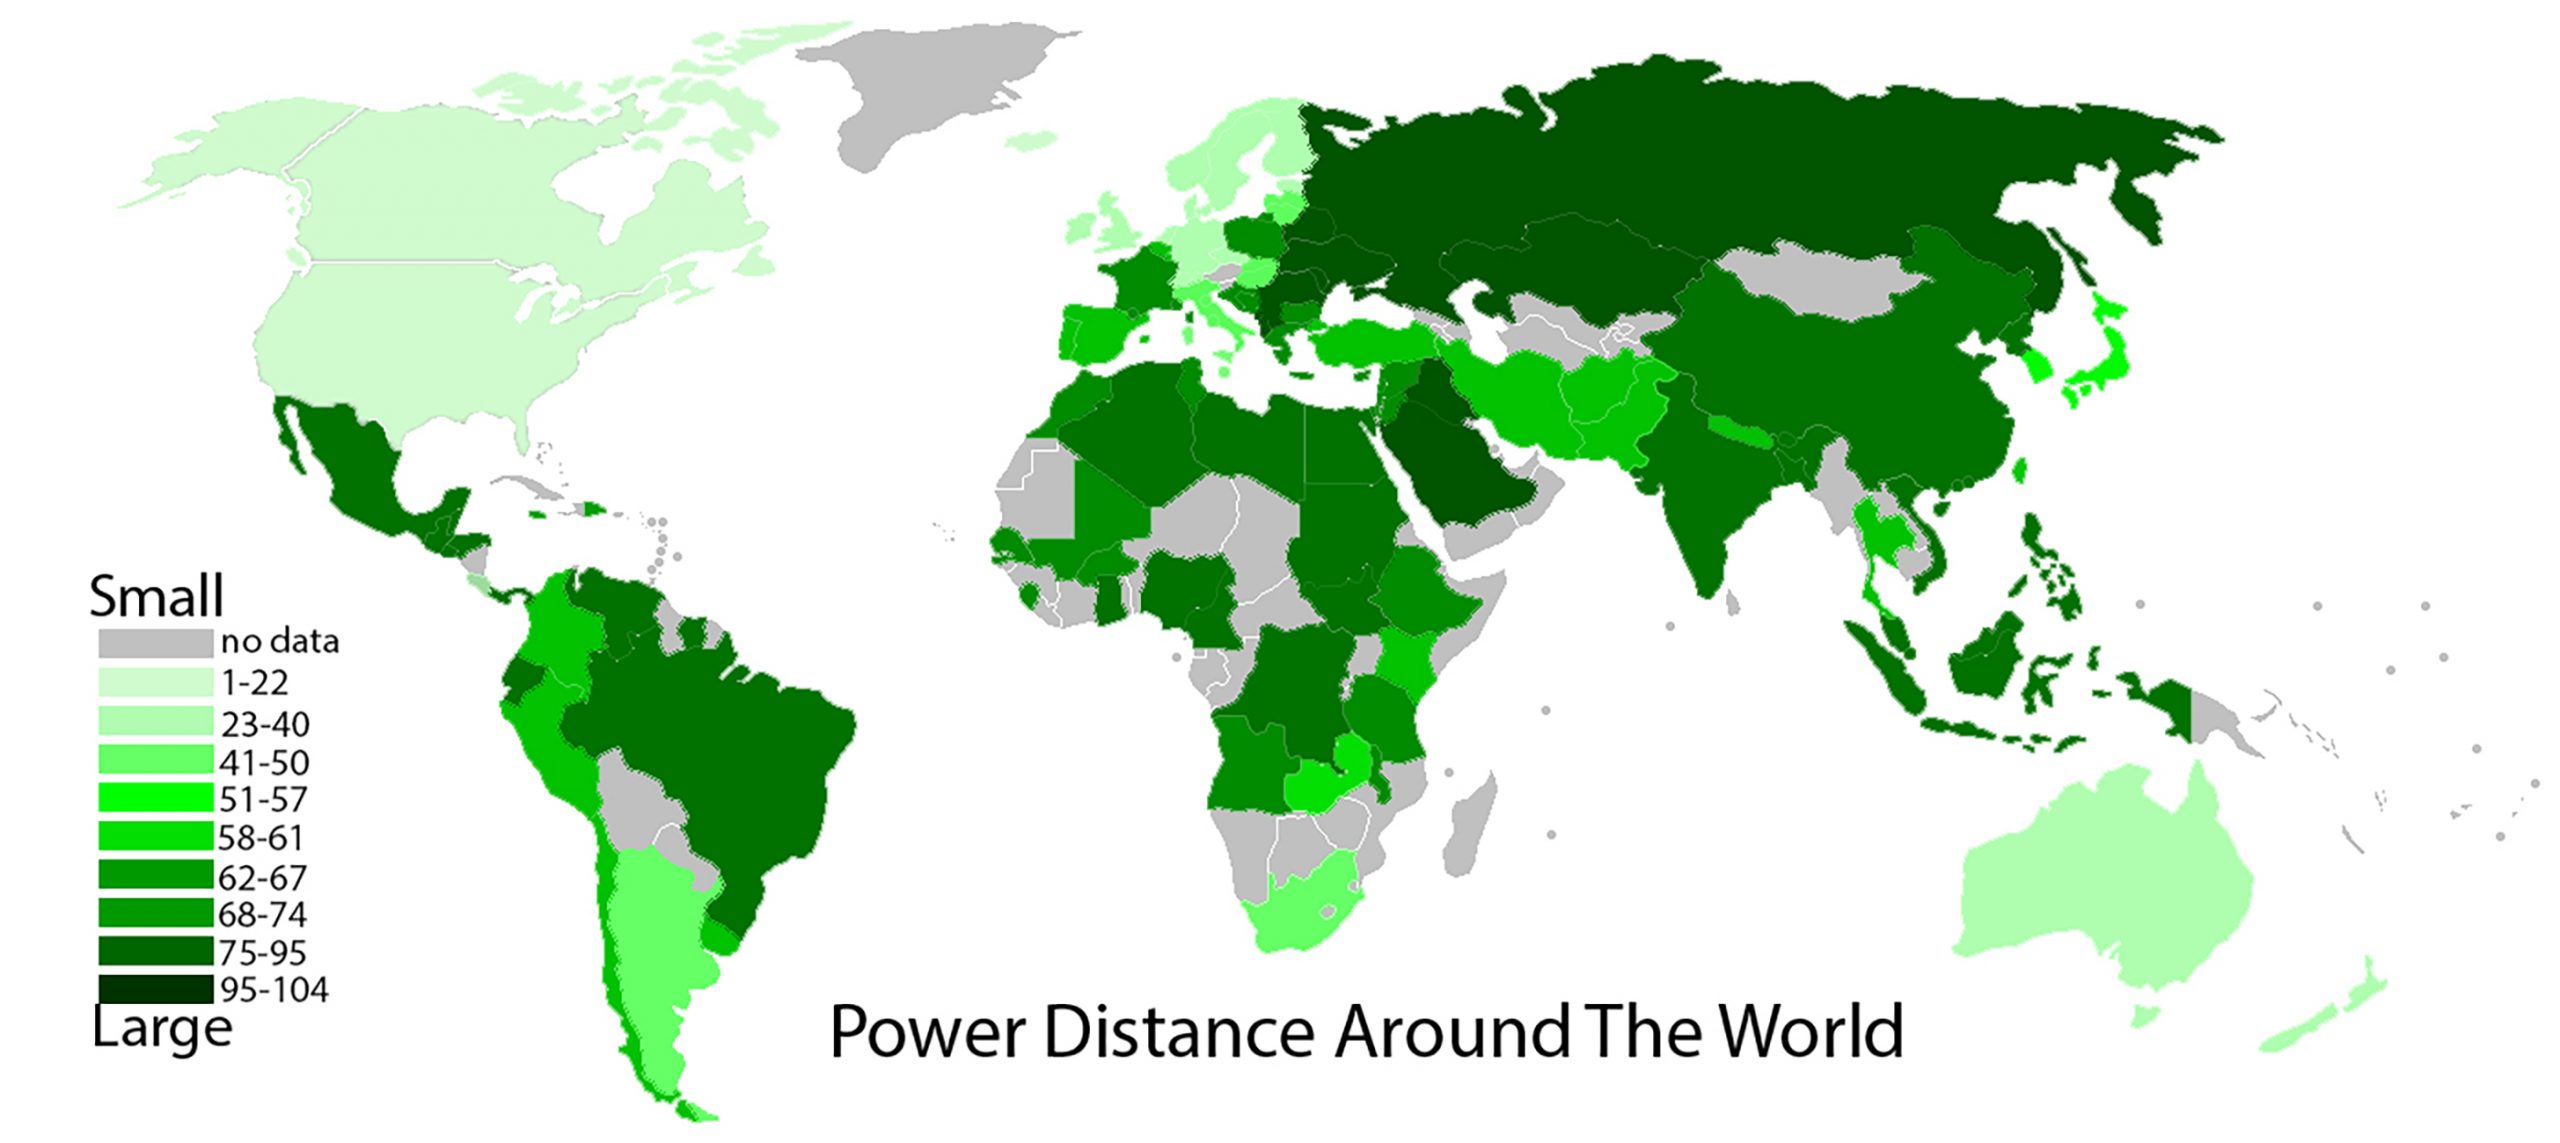 A map which shows the relative power distance of nations around the world